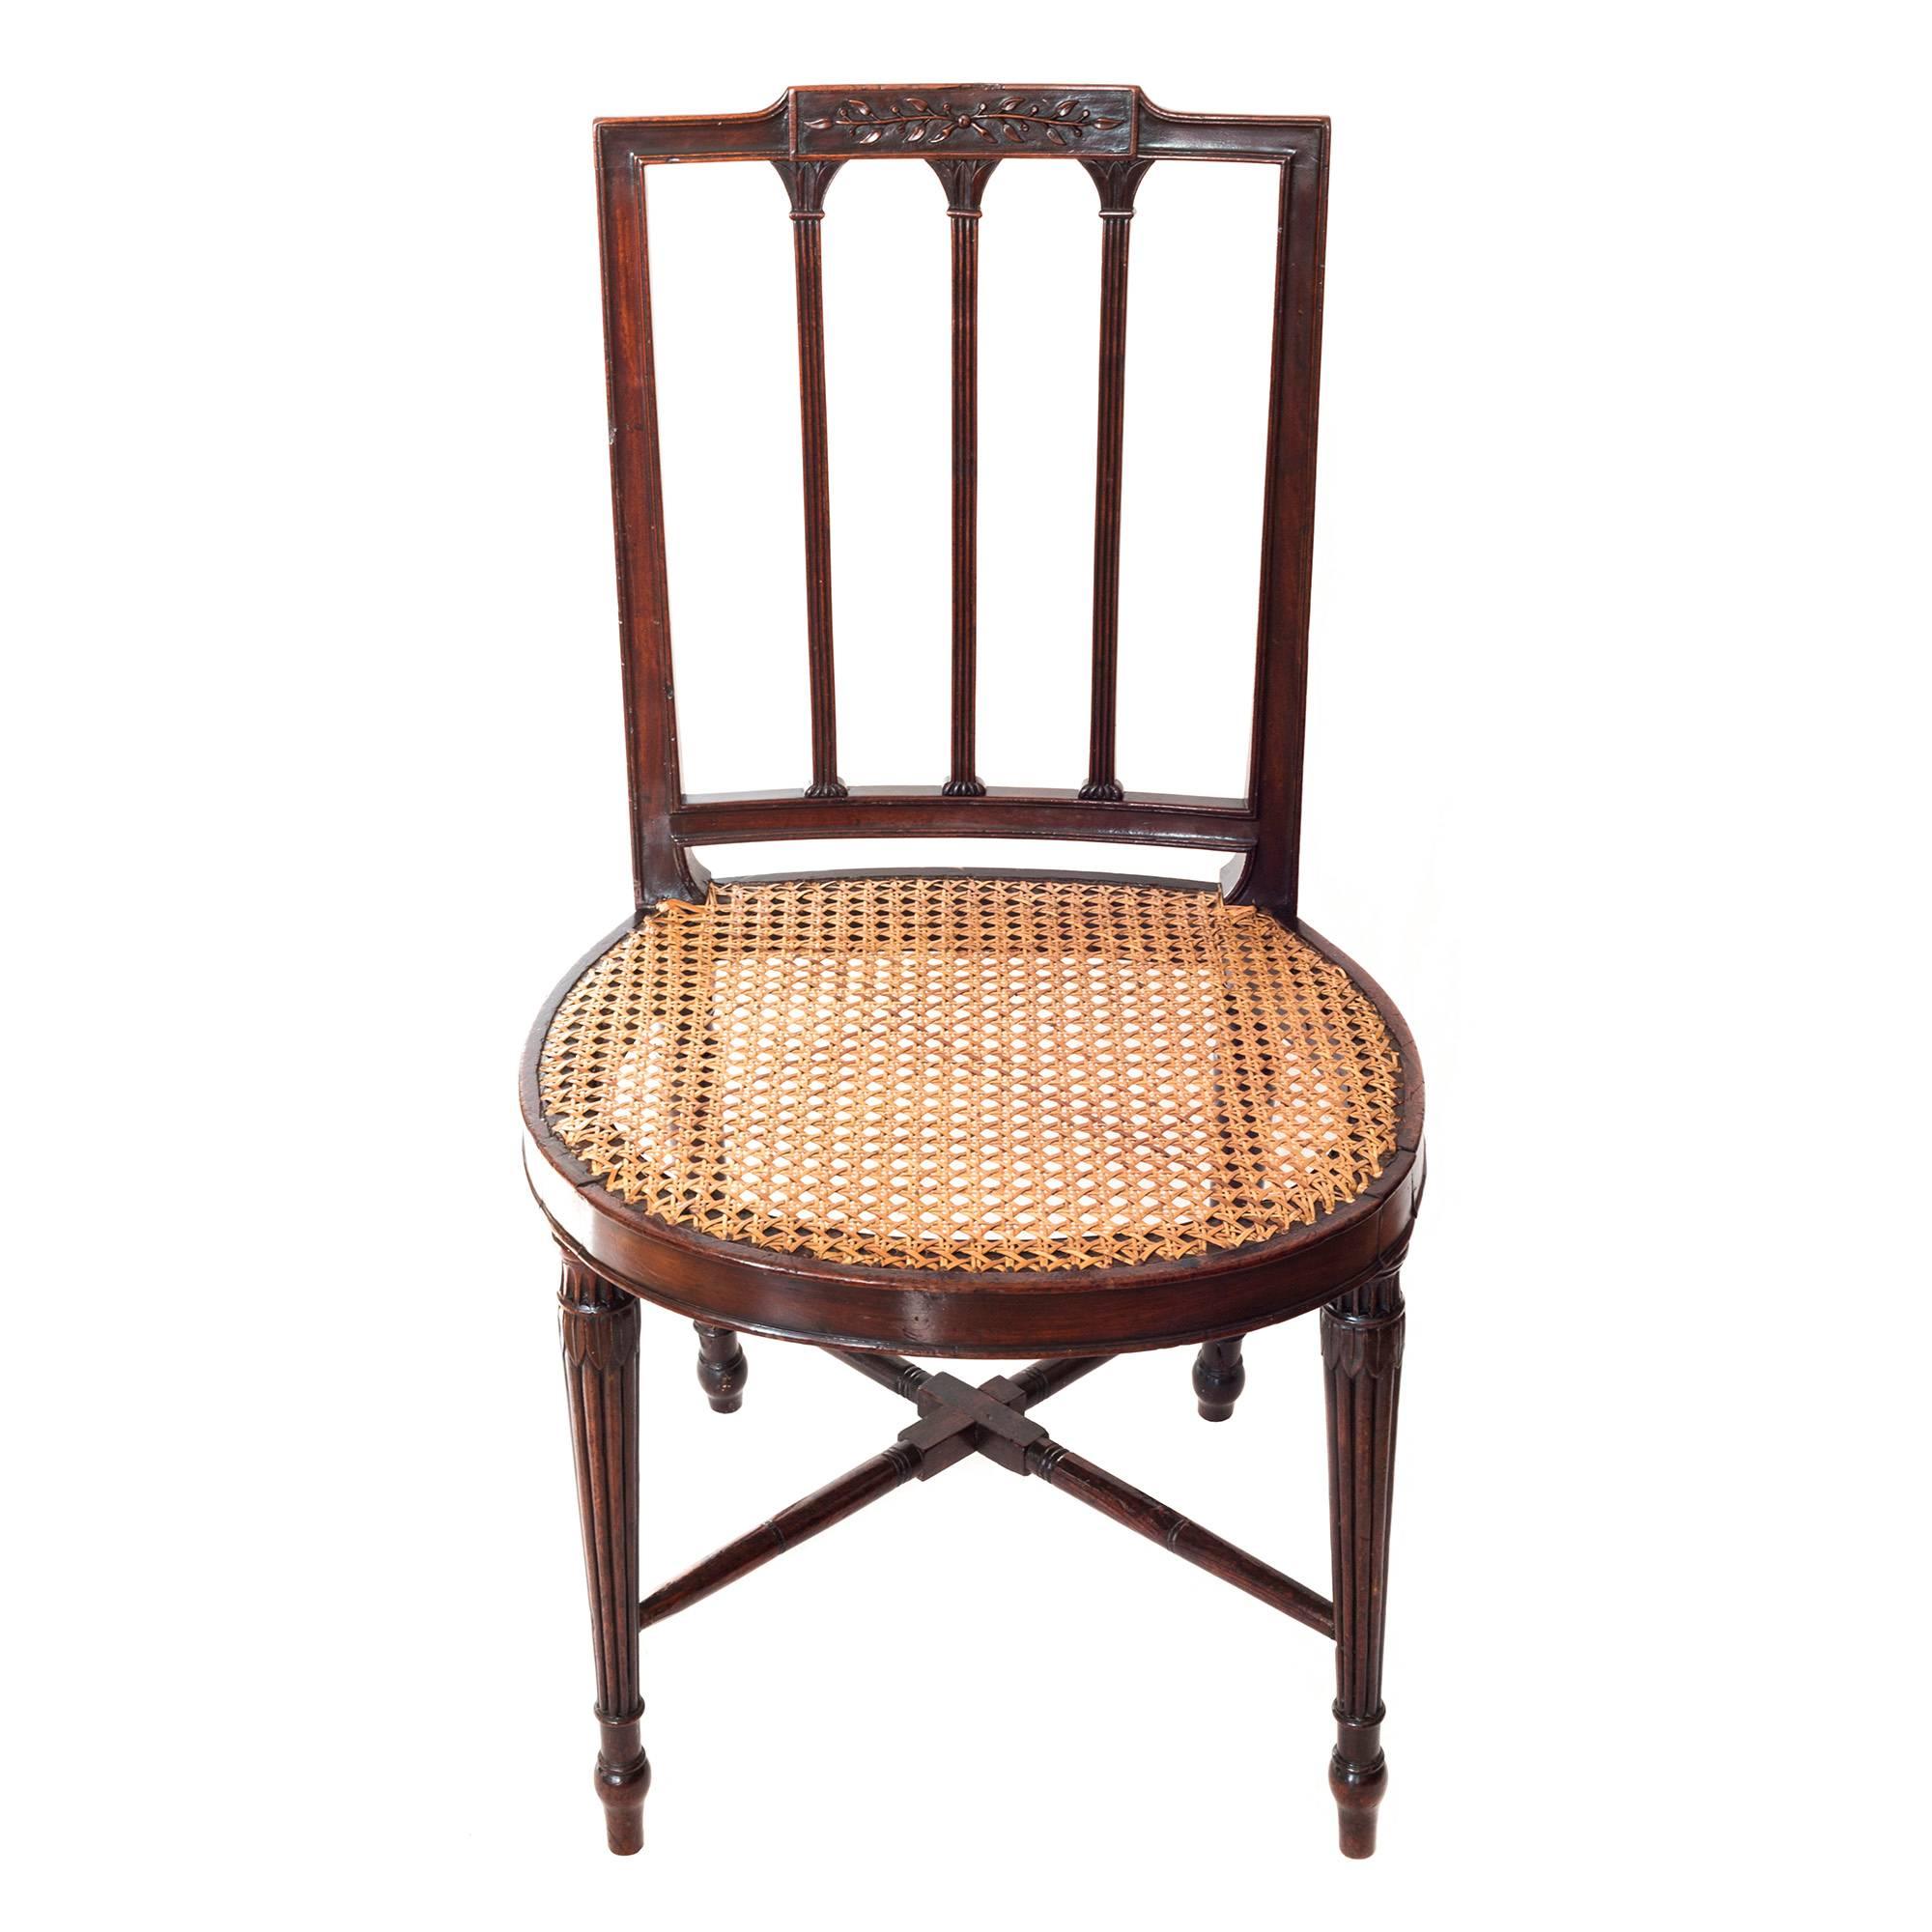 English Fine George III Period Neoclassical Mahogany Side Chair, Manner of Gillows